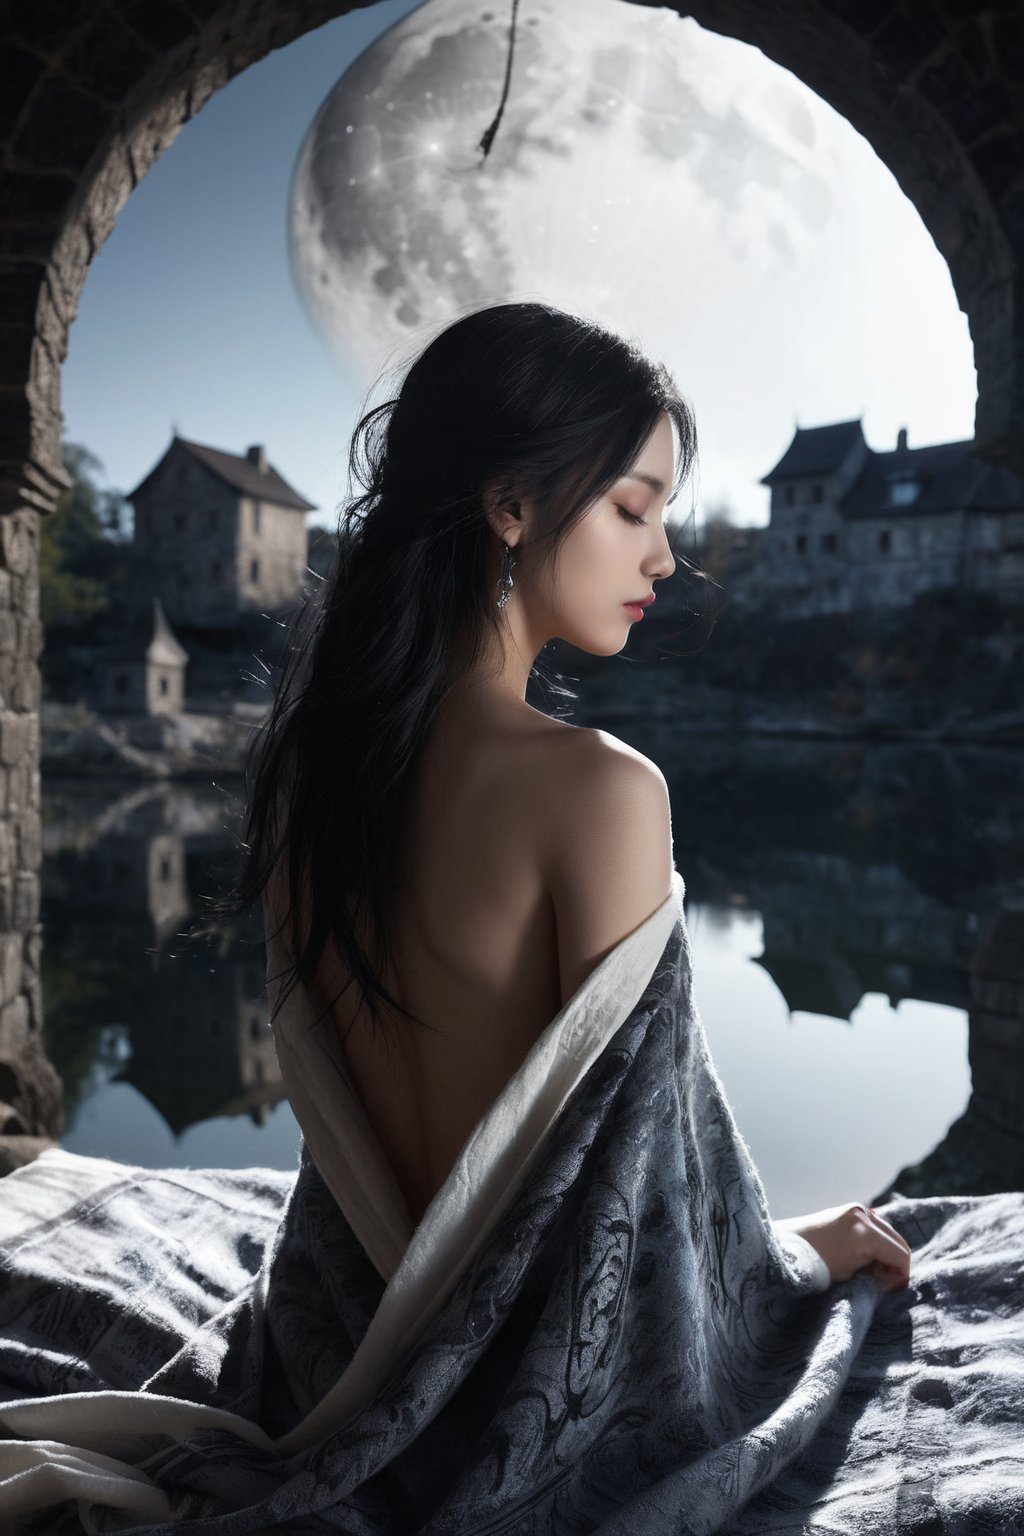 Double Exposure Style, Volumetric Lighting, arching her back, Traditional Attire, Artistic Calligraphy and Ink, light depth, dramatic atmospheric lighting, image combination, fantasy art, , (a blanket:1.3), a girl, black-hair , (naked, nude, )sleeping, looking a the moon, it is in a Witcher setting, lake and cityscape, ruined city, Fantasy, Back lighting, Colorful, Moon, dreamy magical atmosphere,HUBGGIRL,1girl, Extremely beautiful girl,
